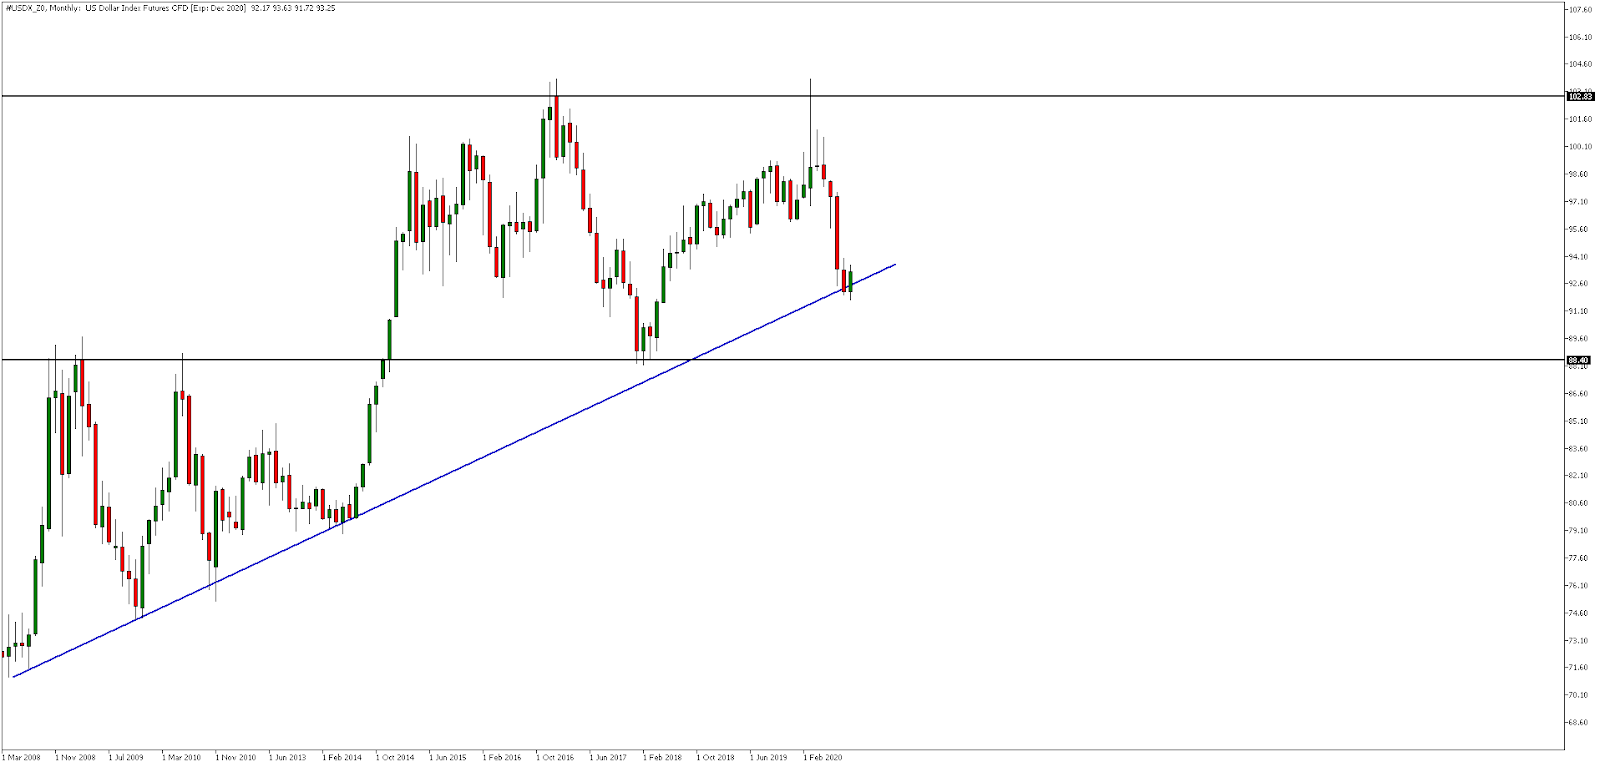 USDX_Z0 Monthly chart